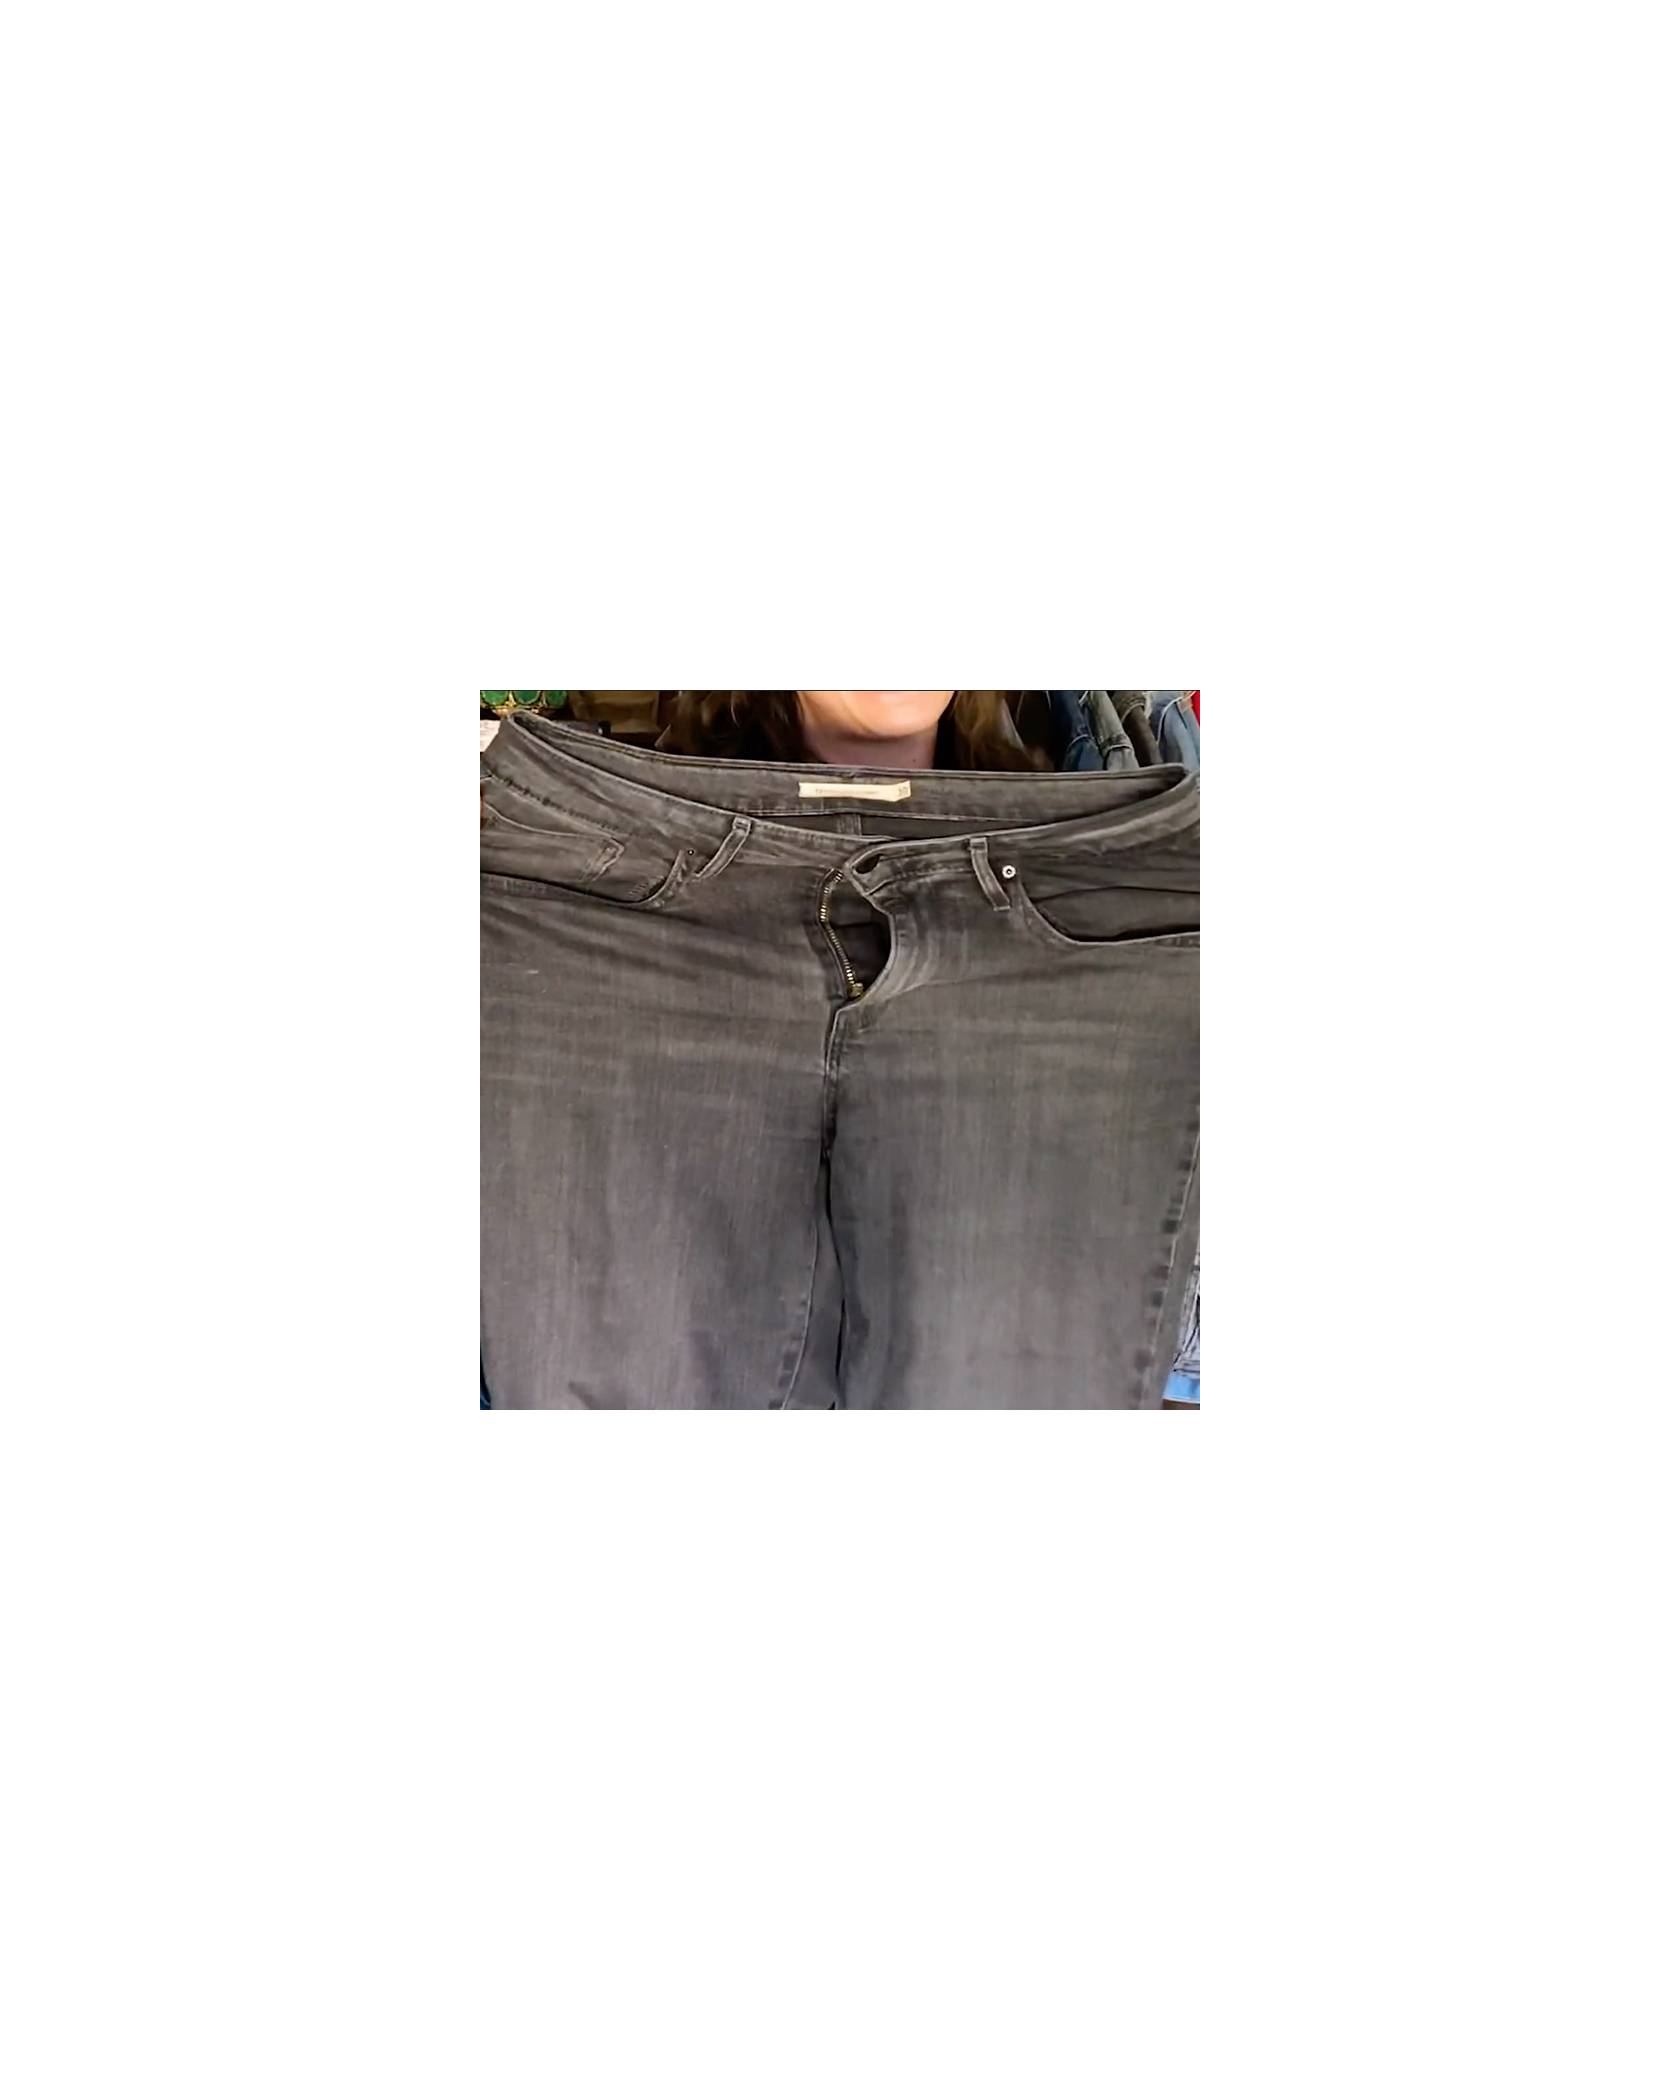 Why some pants and jeans have uneven belt loops spacing?